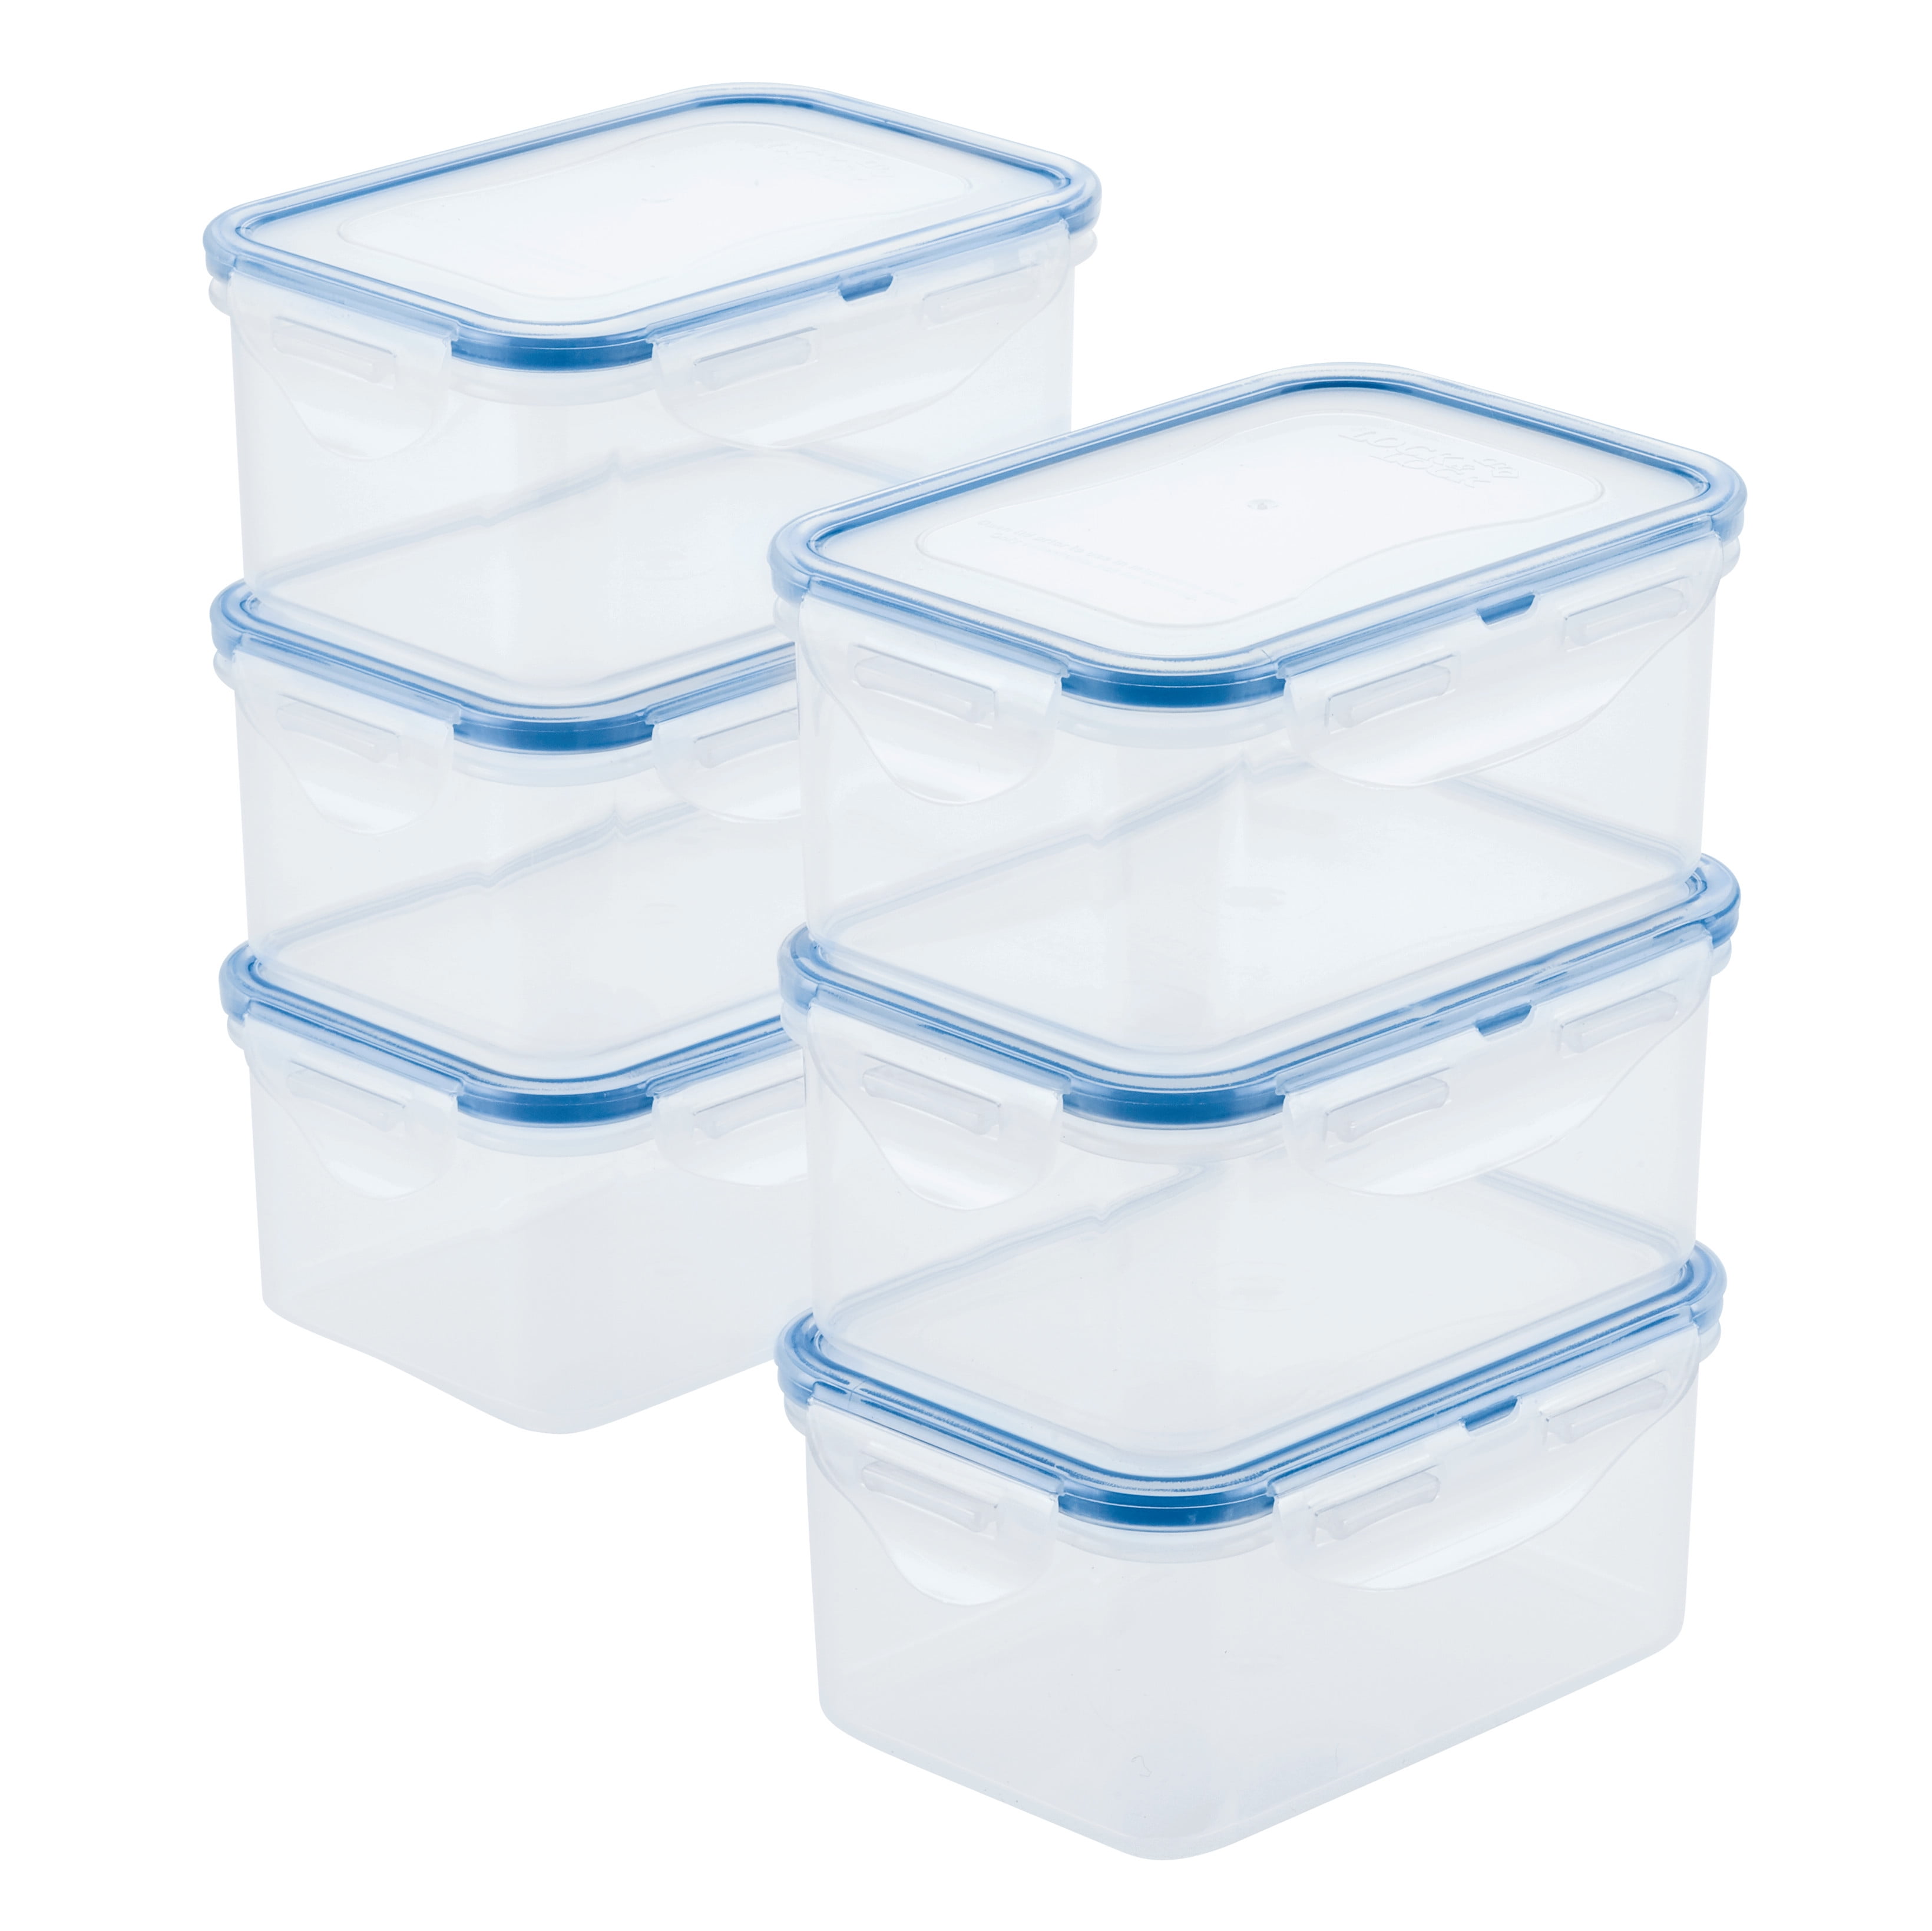 DUXU T-Lock Food Storage Containers – Set of 3, 16Oz Twist & Lock Stackable  Jars - BPA Free & Durable Plastic Snack Containers with Interlocking  Leakproof Lids - Keep Food Dry & Fresh (white)